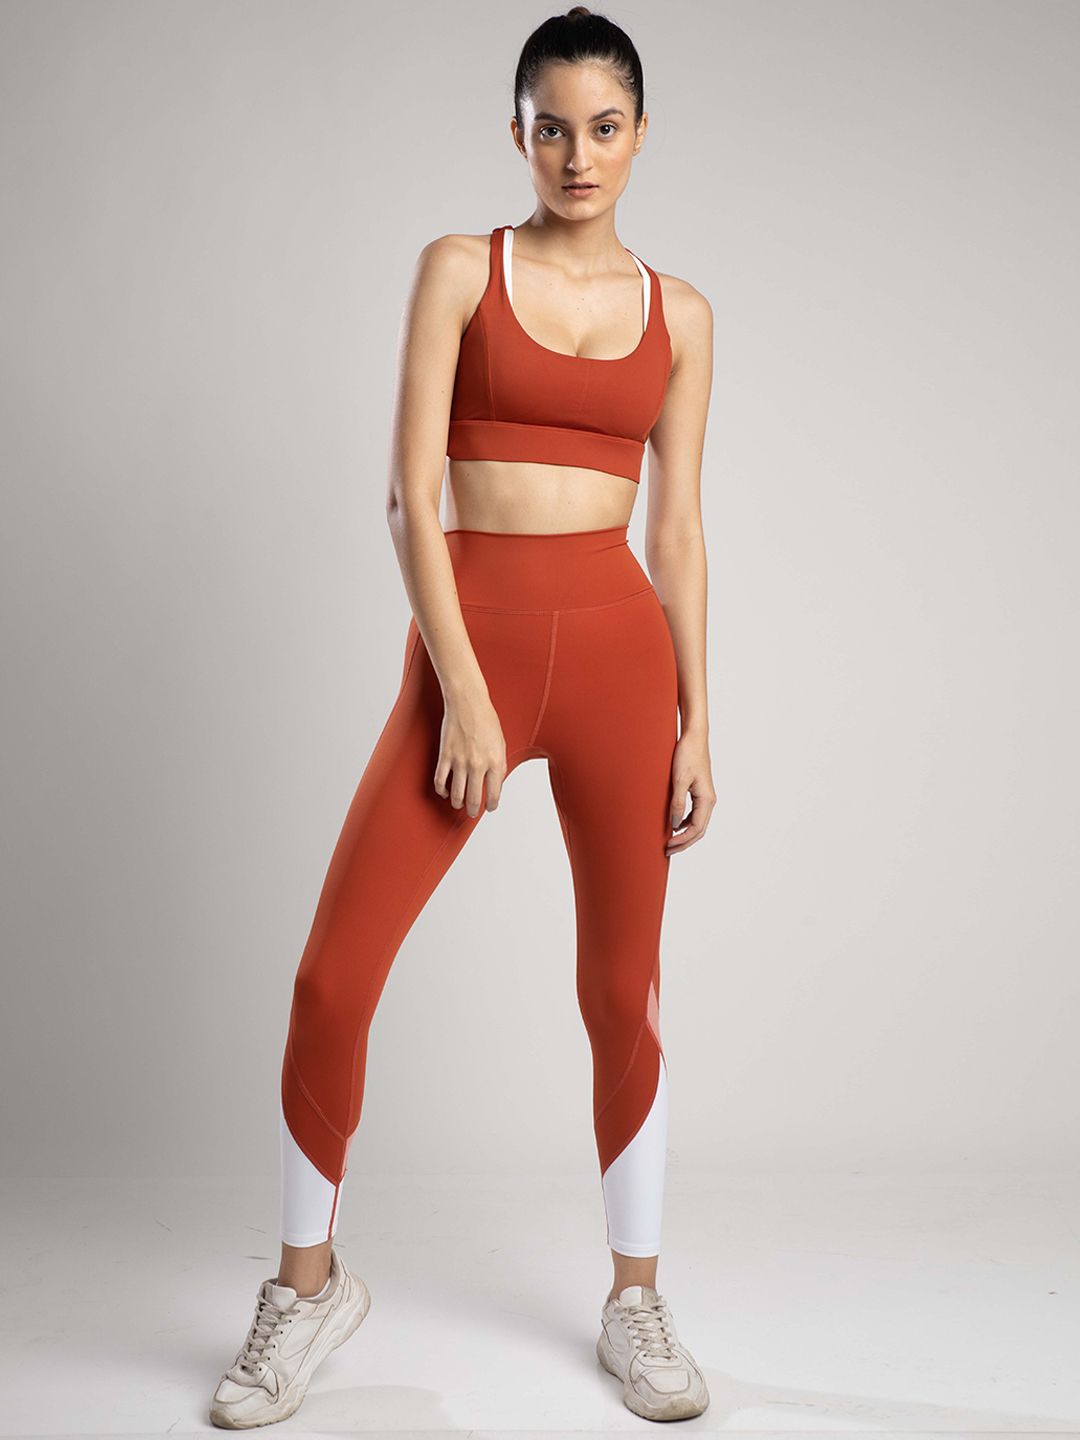 SKNZ Women Red & White Solid Seamless Top & Tights Set Price in India